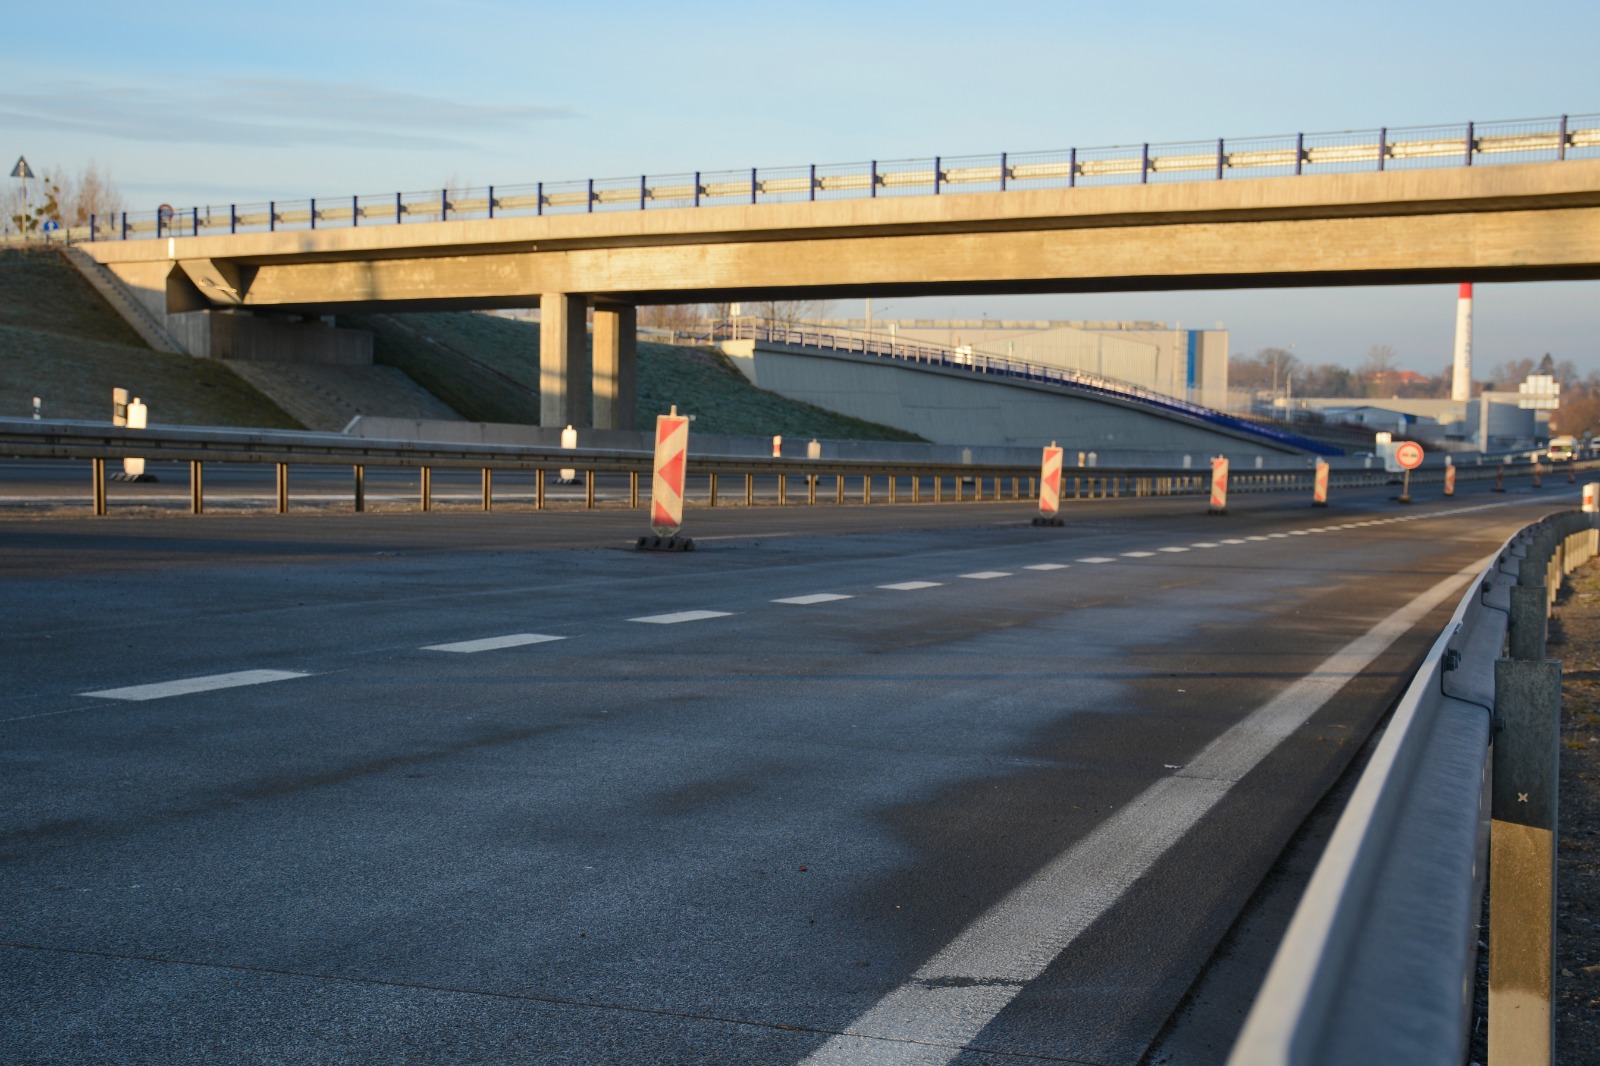 11.5 km of a new motorway D48 from Rybí to Rychaltice opened